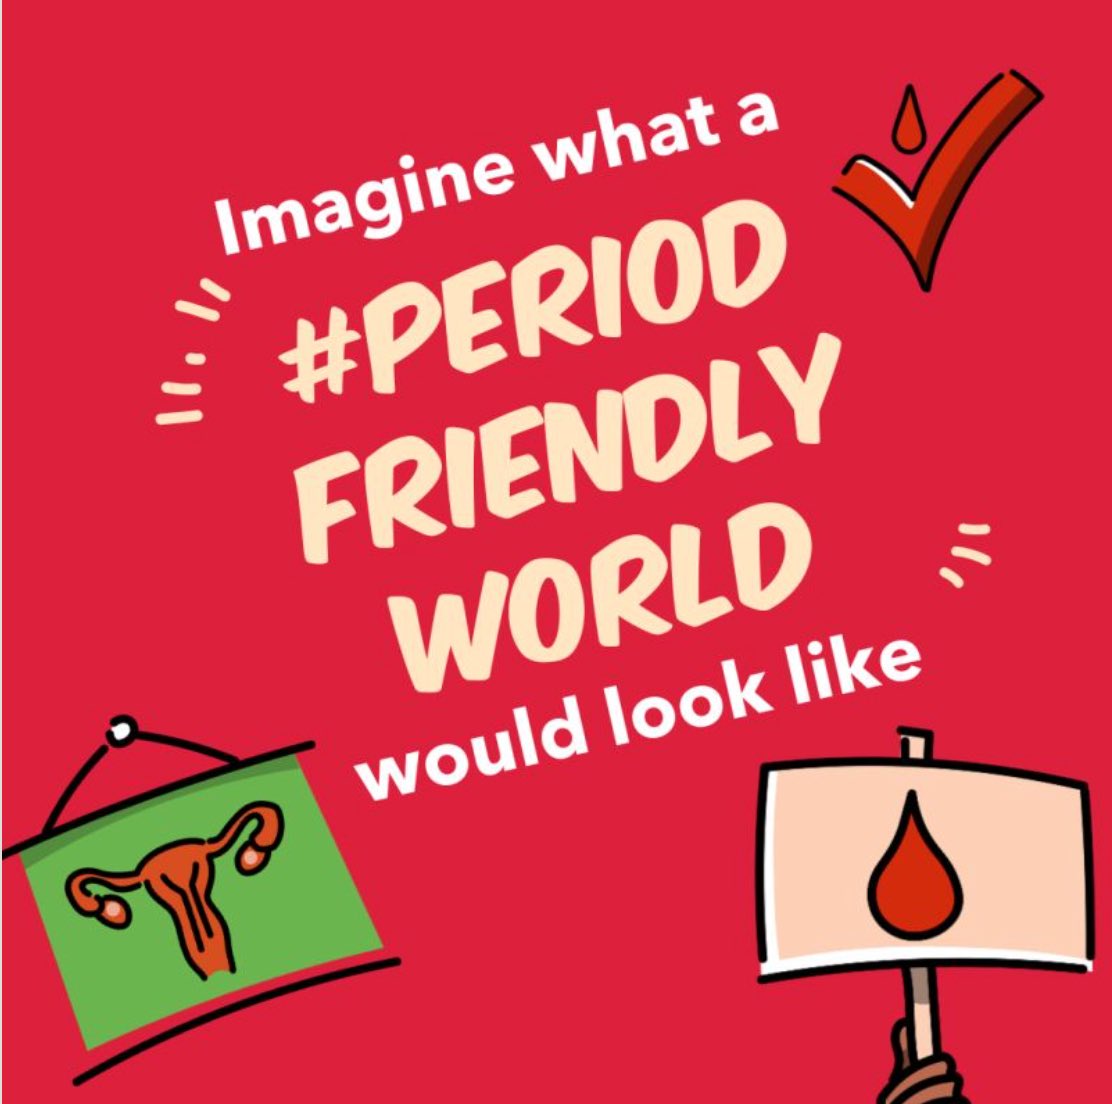 📢 On #MenstrualHygieneDay, we stand united with global partners! 🌍 @womenite , based in India, is proud to present our #EndPeriodPoverty campaign, distributing 1.3 million sanitary napkins, impacting over 60,000 girls and women under the leadership of @IrsAman ma’am 💪 #periods